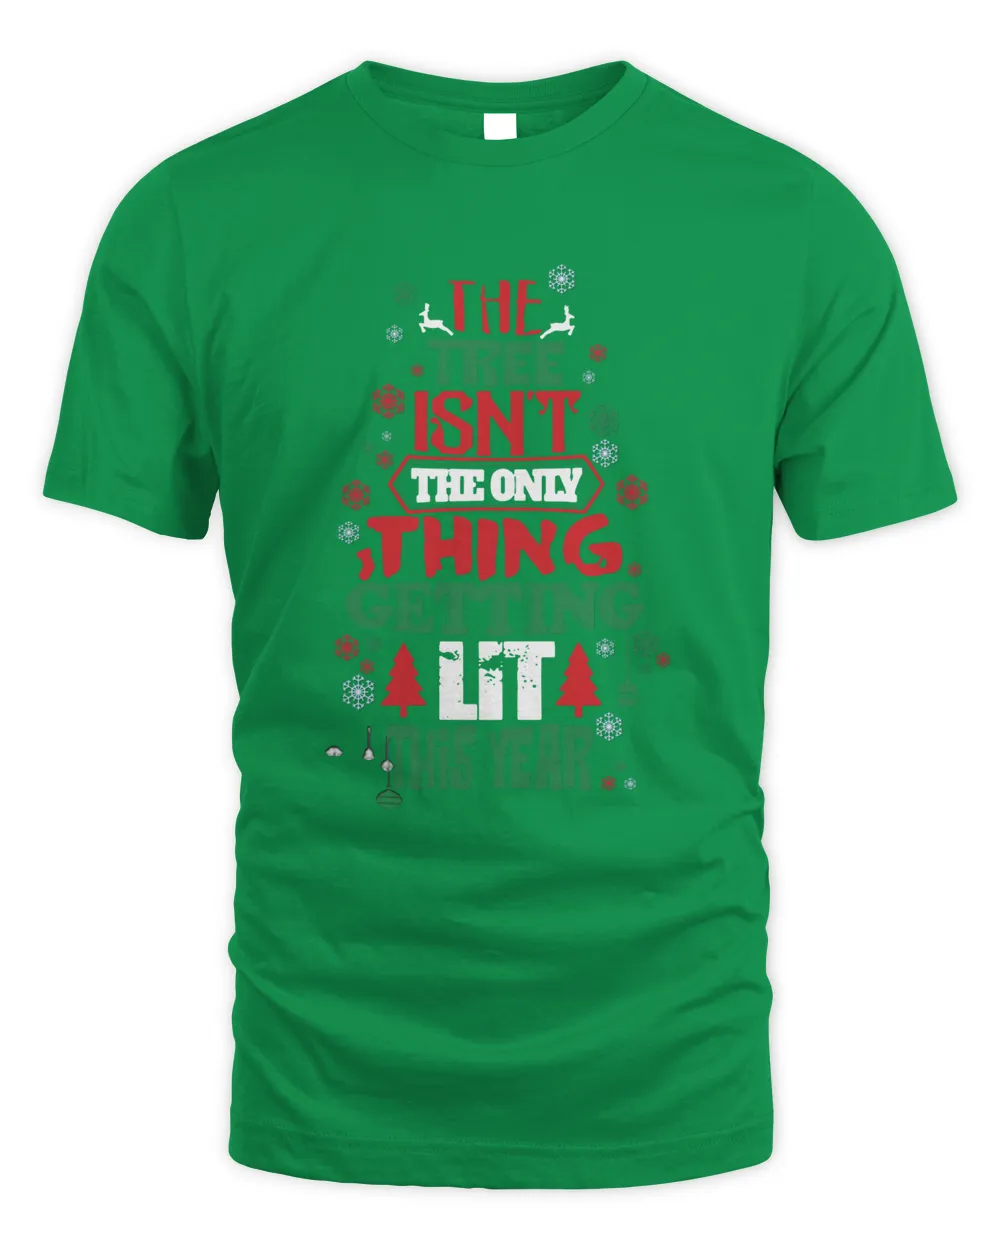 The Free Isn't The Only Thing Getting Lit This Year Merry Christmas Sweatshirt